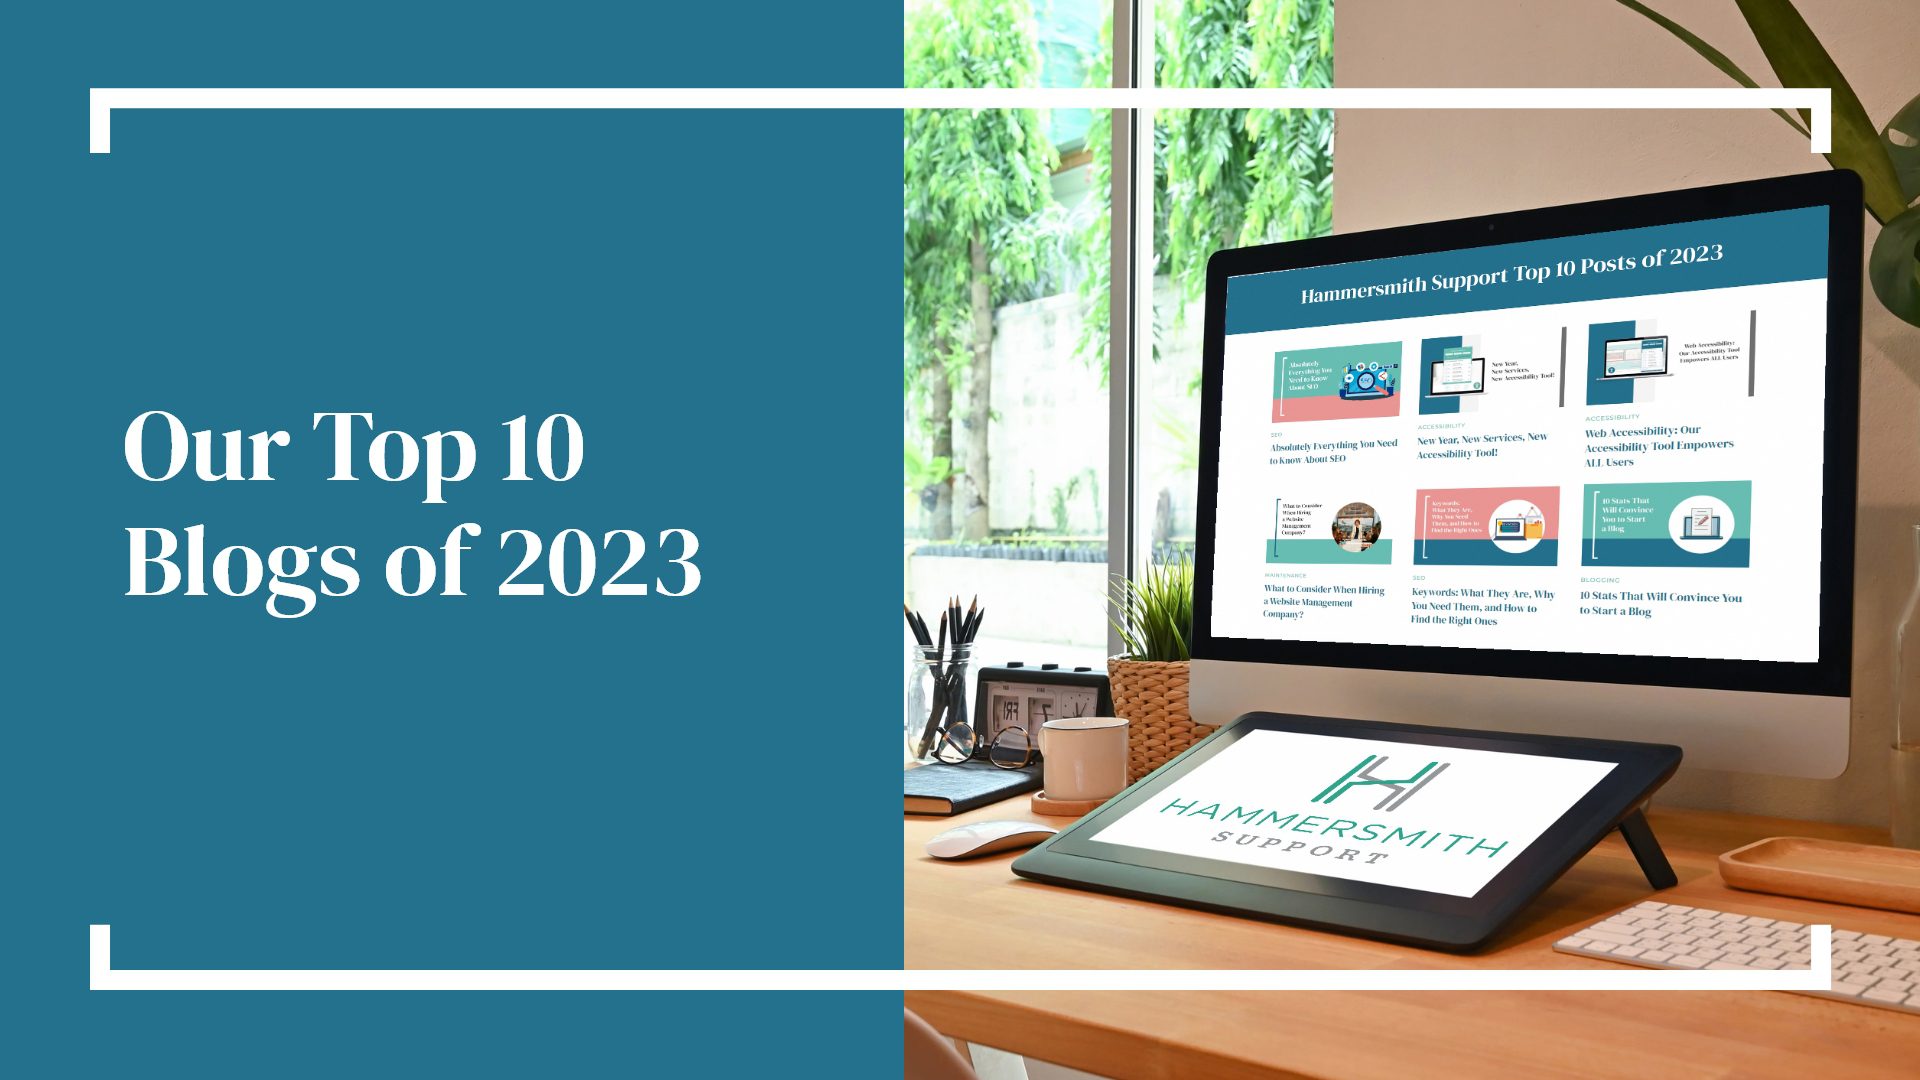 Our Top 10 Blogs of 2023